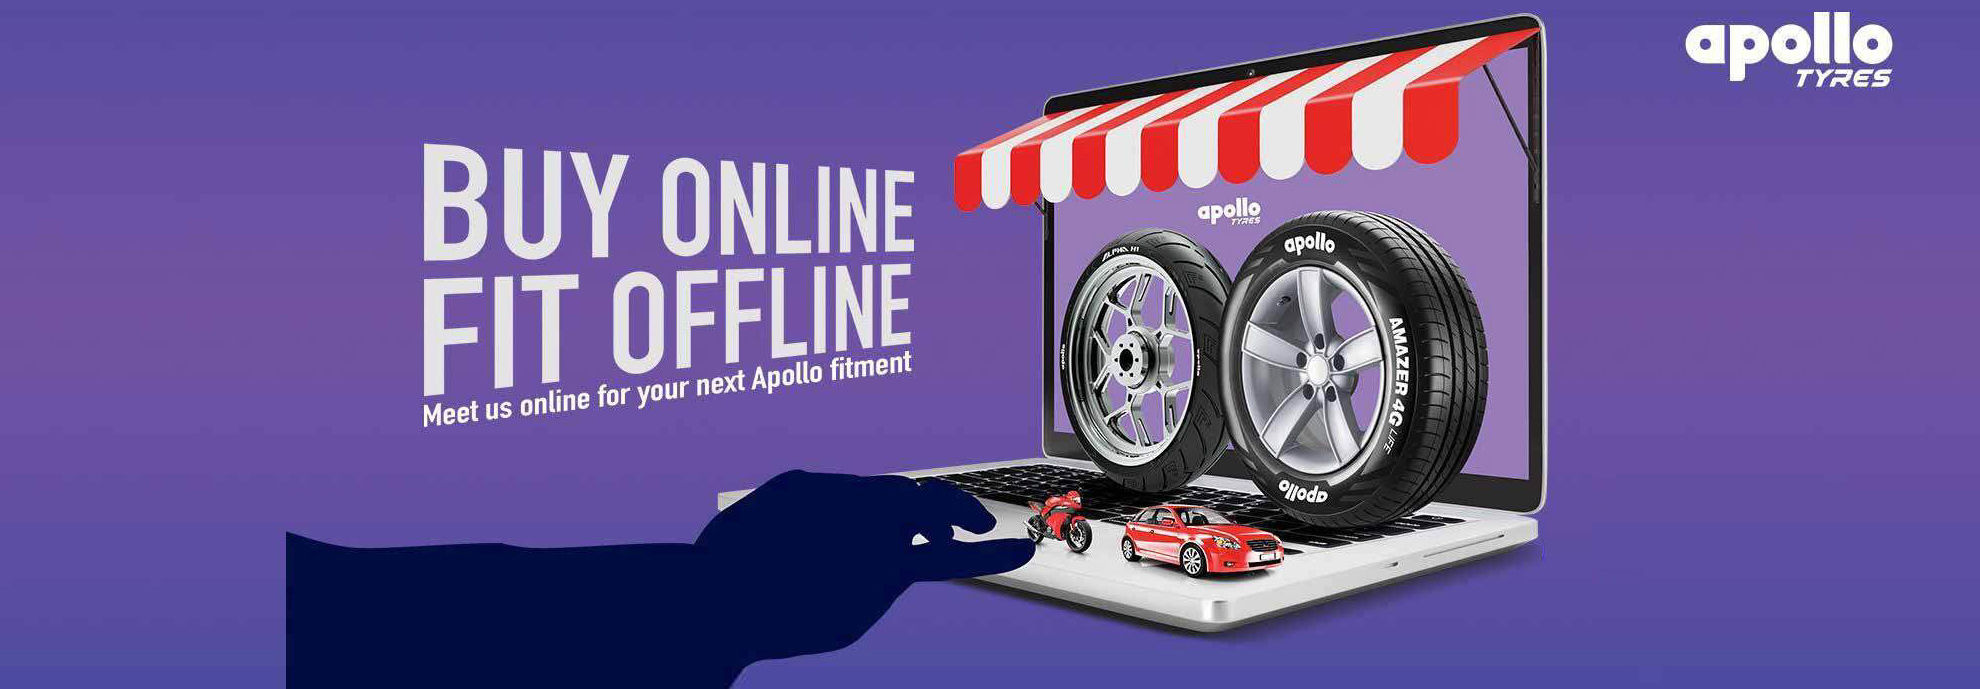 Apollo Tyres - Buy Tyres Online at Best Price | Check Tyre Price and Size